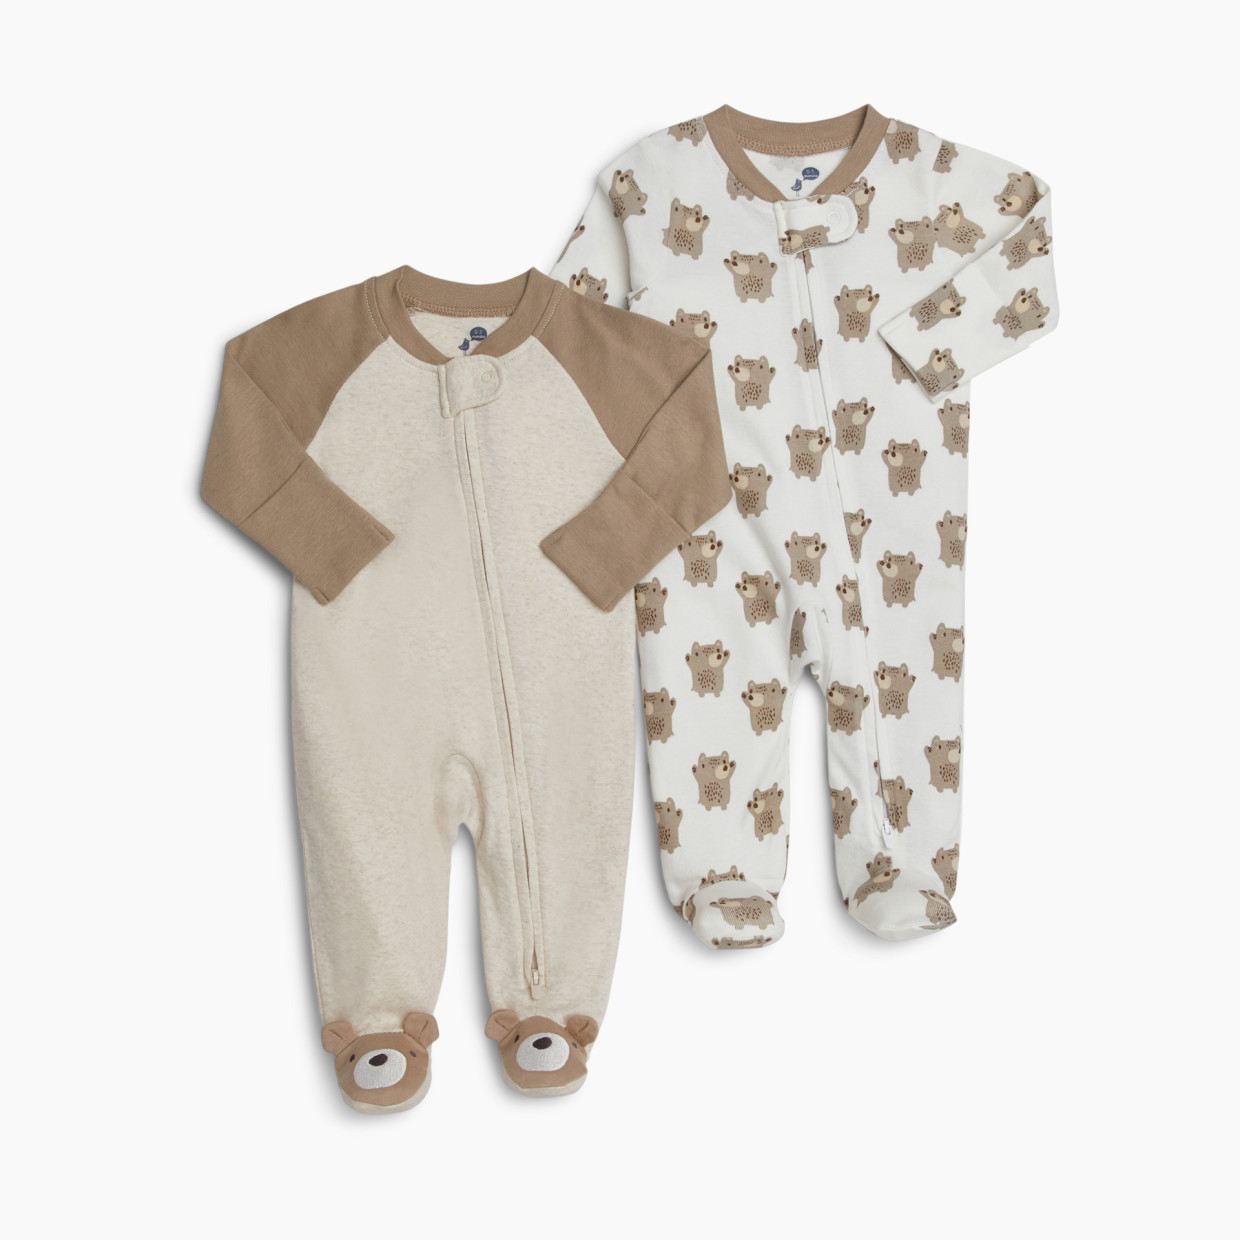 Small Story Printed Footie (2 Pack) - Neutral Bears, 3-6 M.